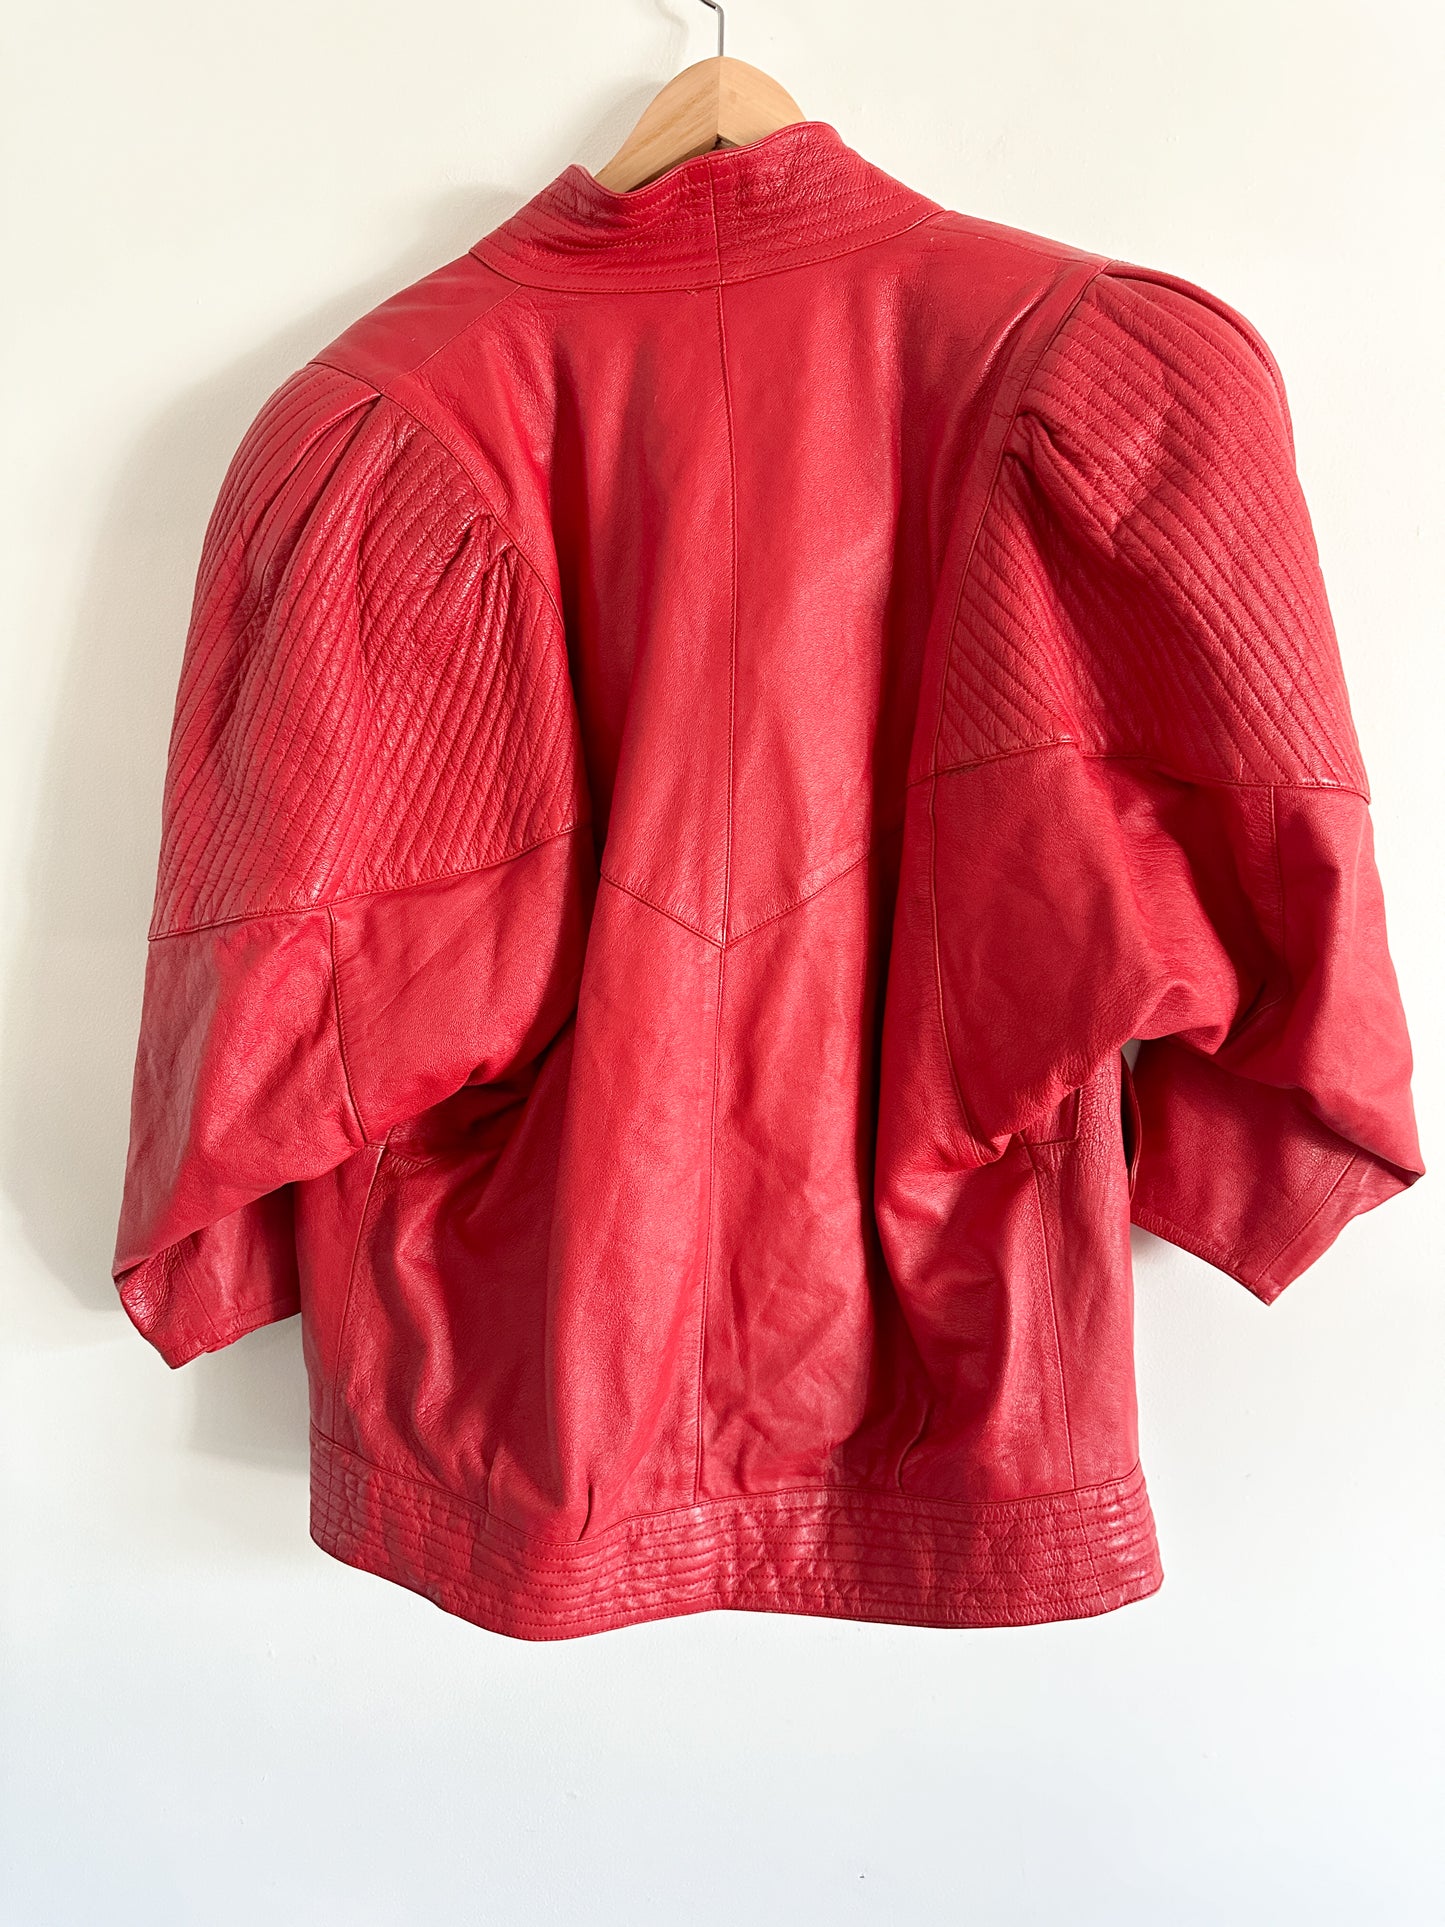 Red Leather Bomber Jacket | Berto Vanelli Red Leather Jacket| Cropped Red Leather Jacket